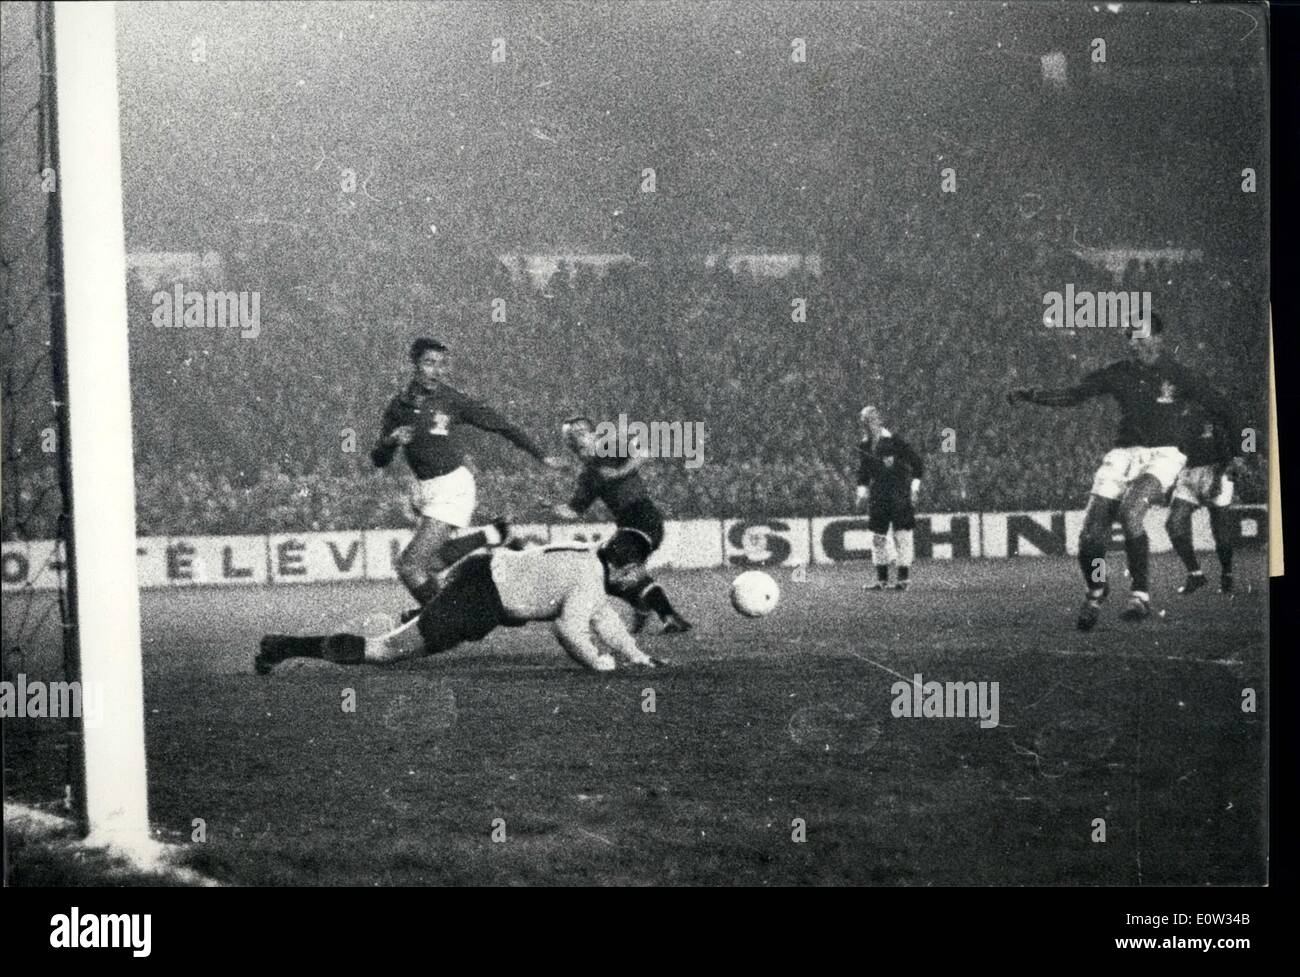 Mar. 03, 1961 - Football: Franc ties up with Belgium 1-1: In a night game  held at the Parc Des Princes, Paris, last night, the French team tied up  with the Belgians )